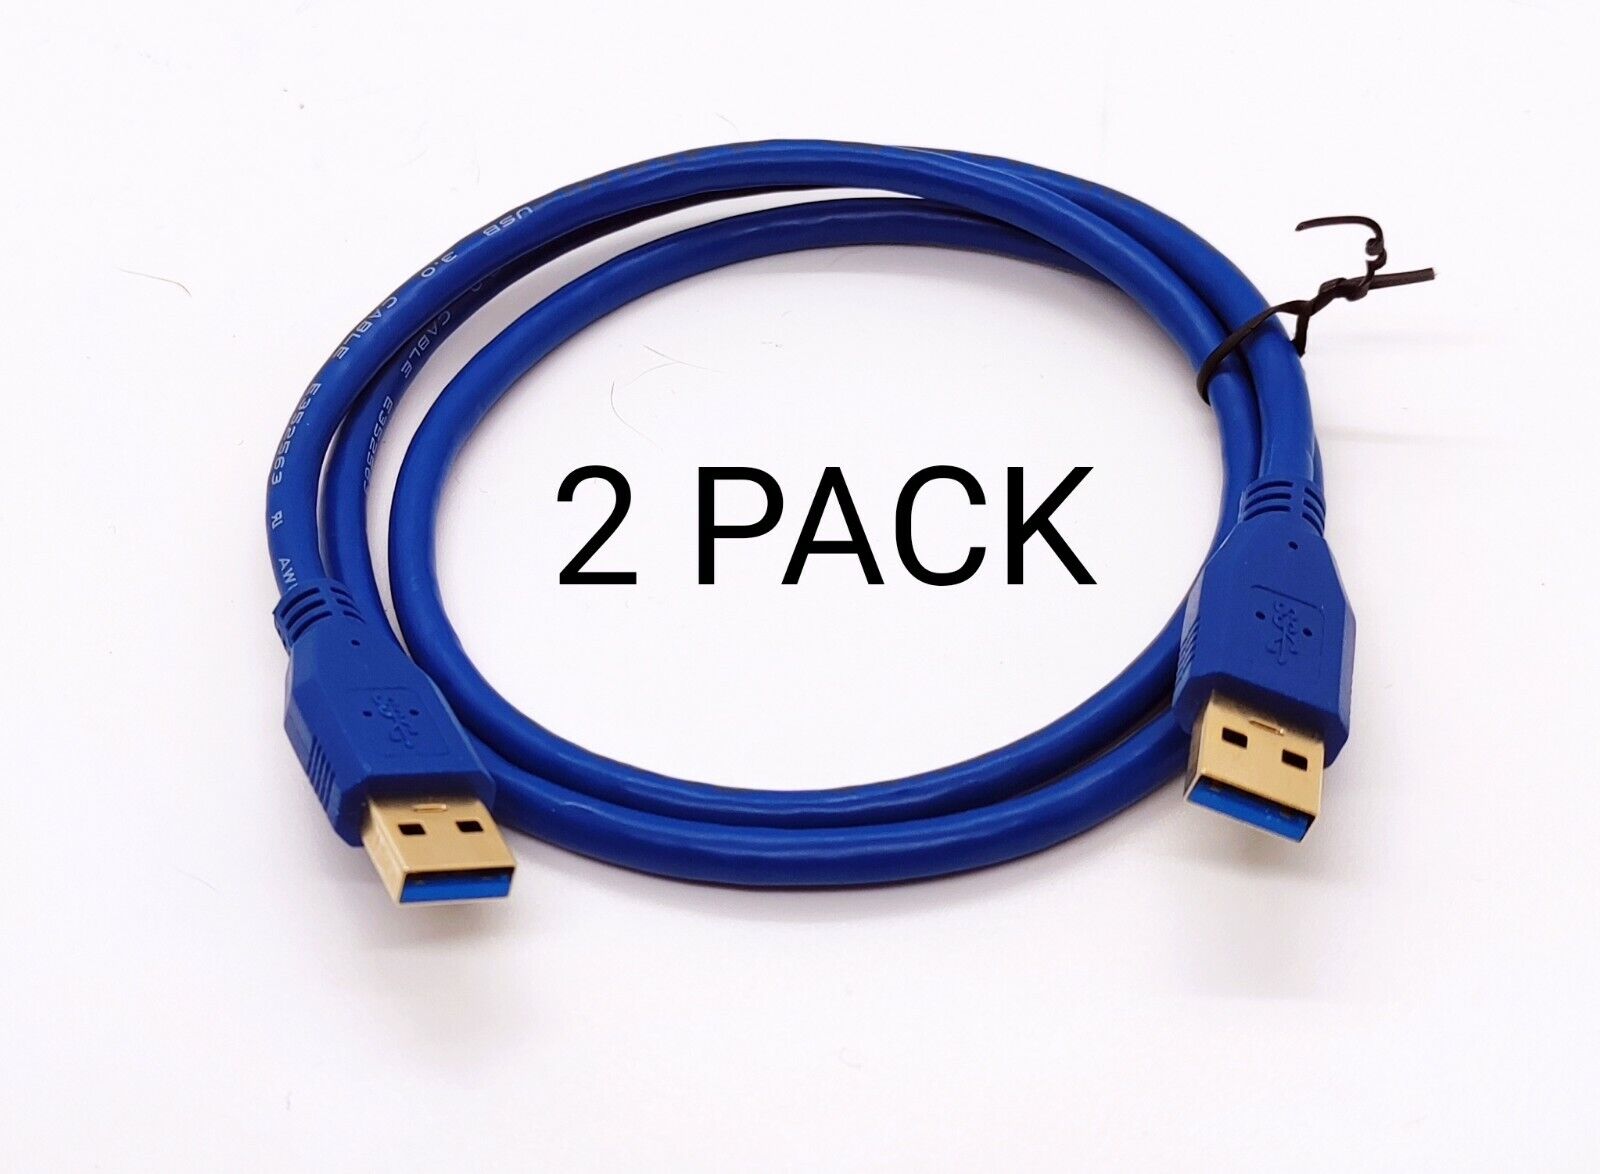 2 Pack 3Ft USB 3.0 Super Speed 4.8Gbps Gold Plate Type A Male to Male Cable Blu 